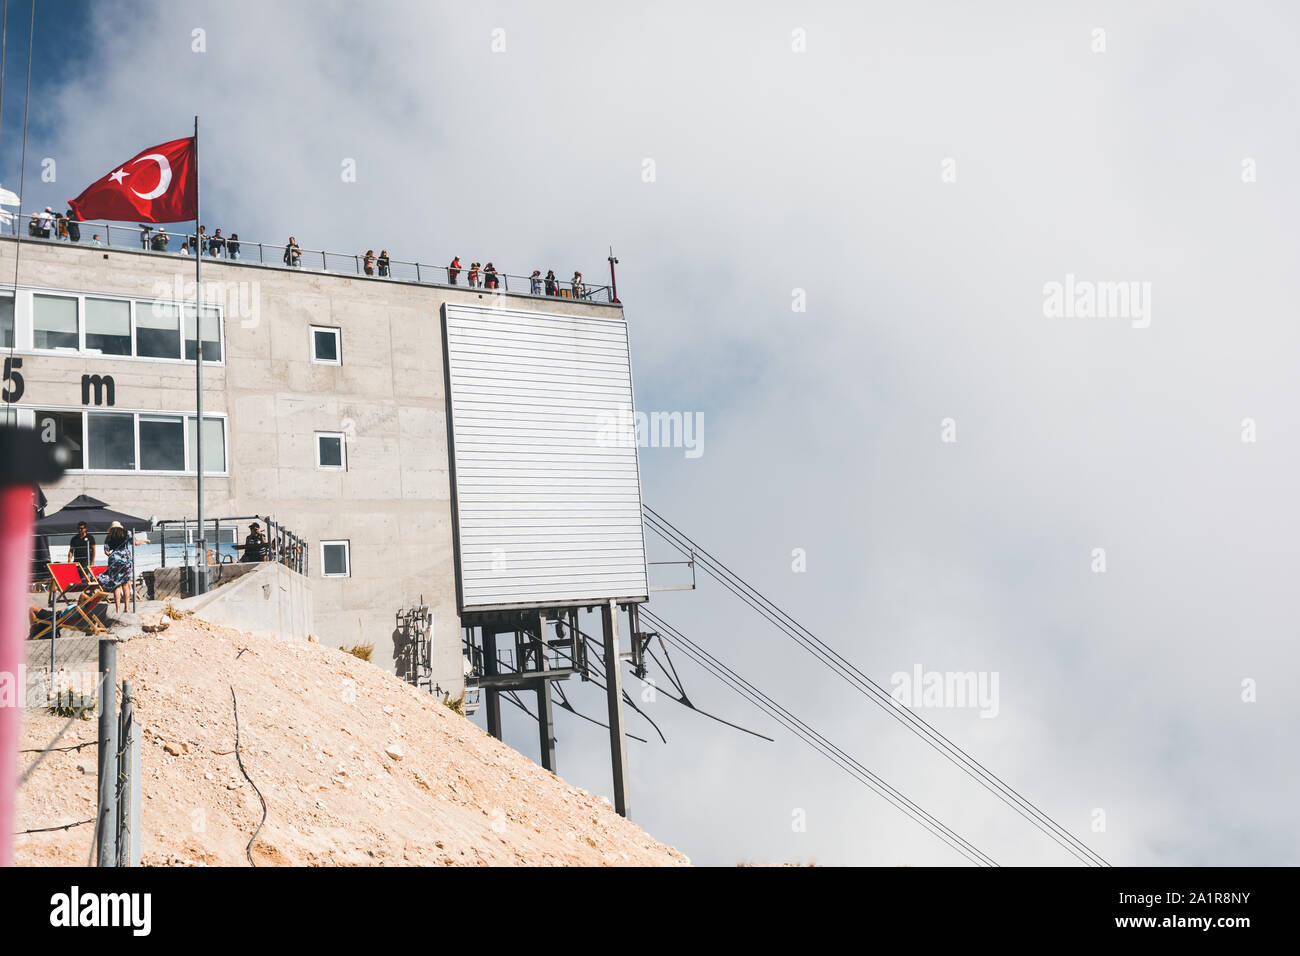 Upper Tahtali Mountain Cable Car Station in Kemer, Turkey Stock Photo